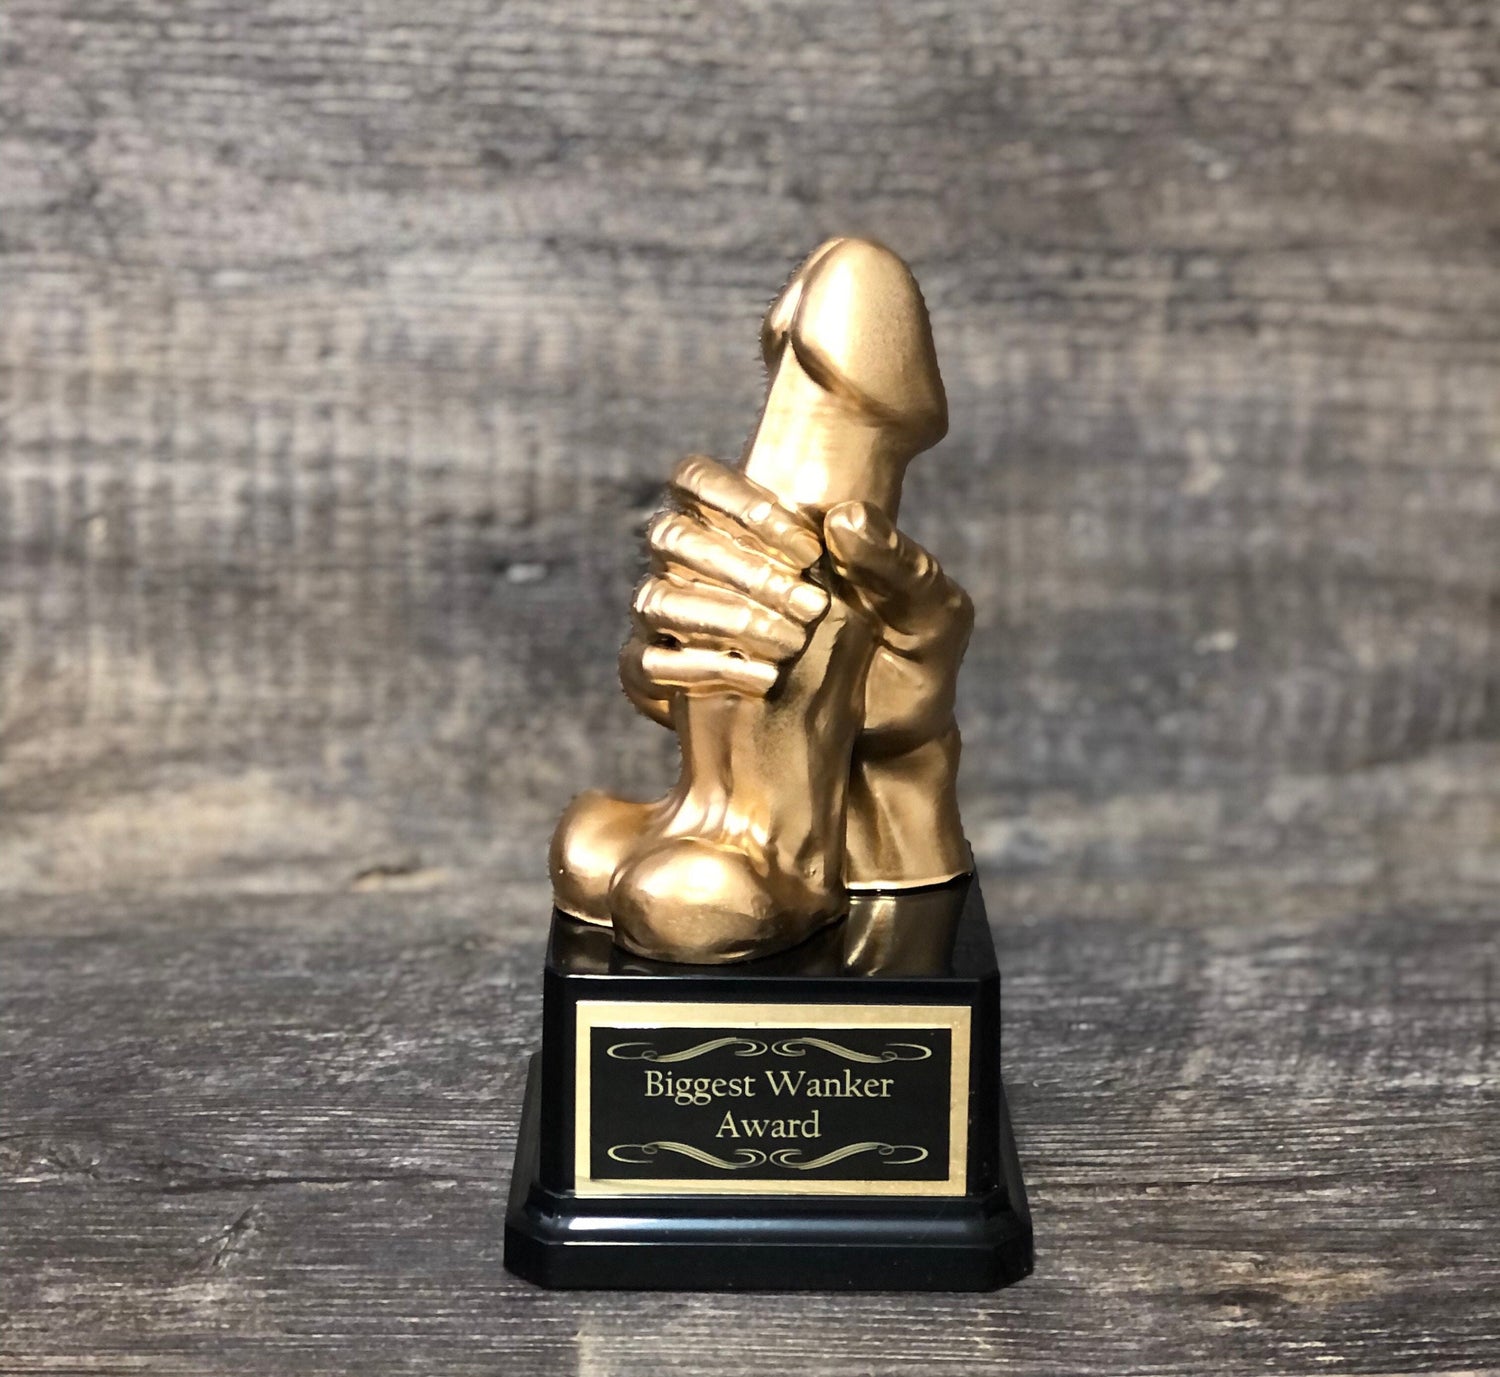 Funny Penis Trophy WANKER Award Loser Last Place Trophy You Suck Balls Adult Humor Gag Gift Golden Testicle Trophy Birthday Personalize Gift